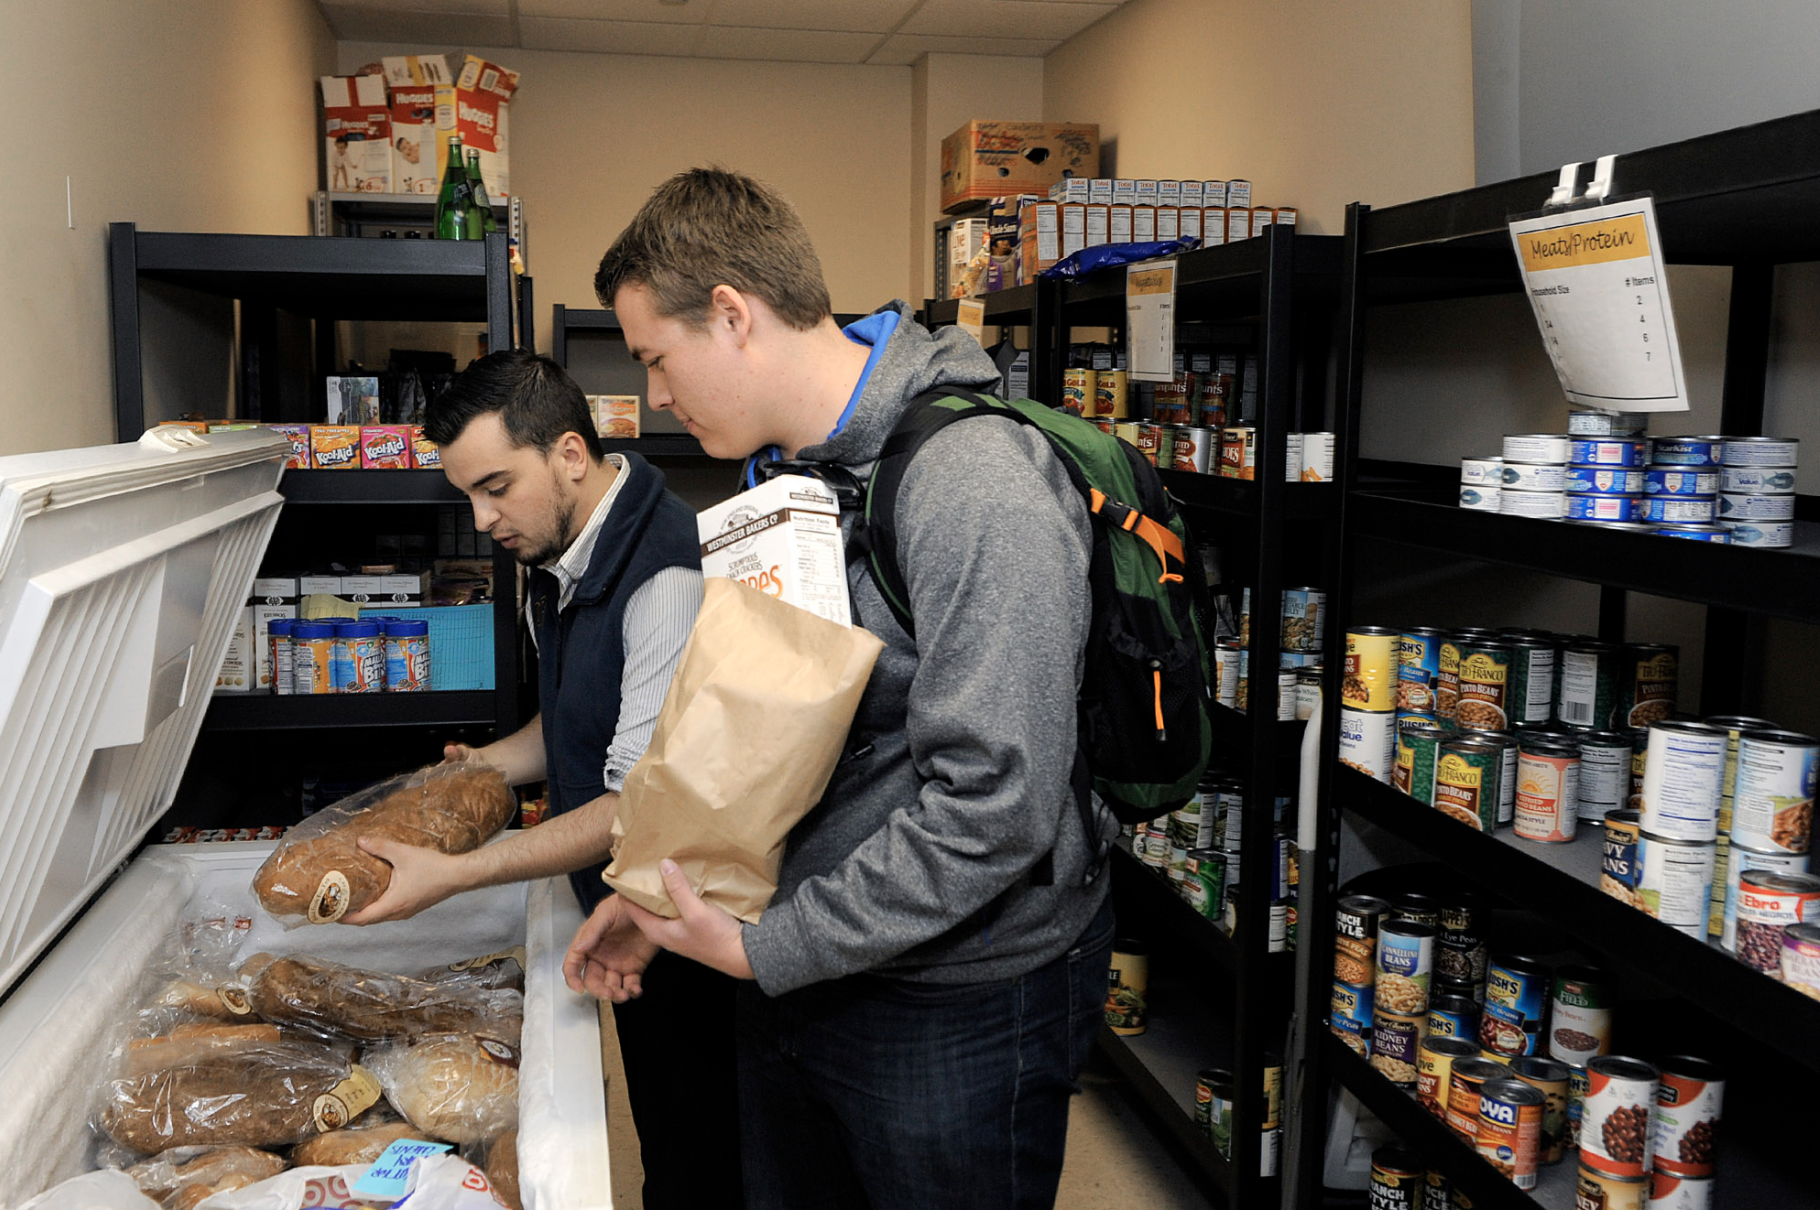 Central Pantry offers assistance to campus community